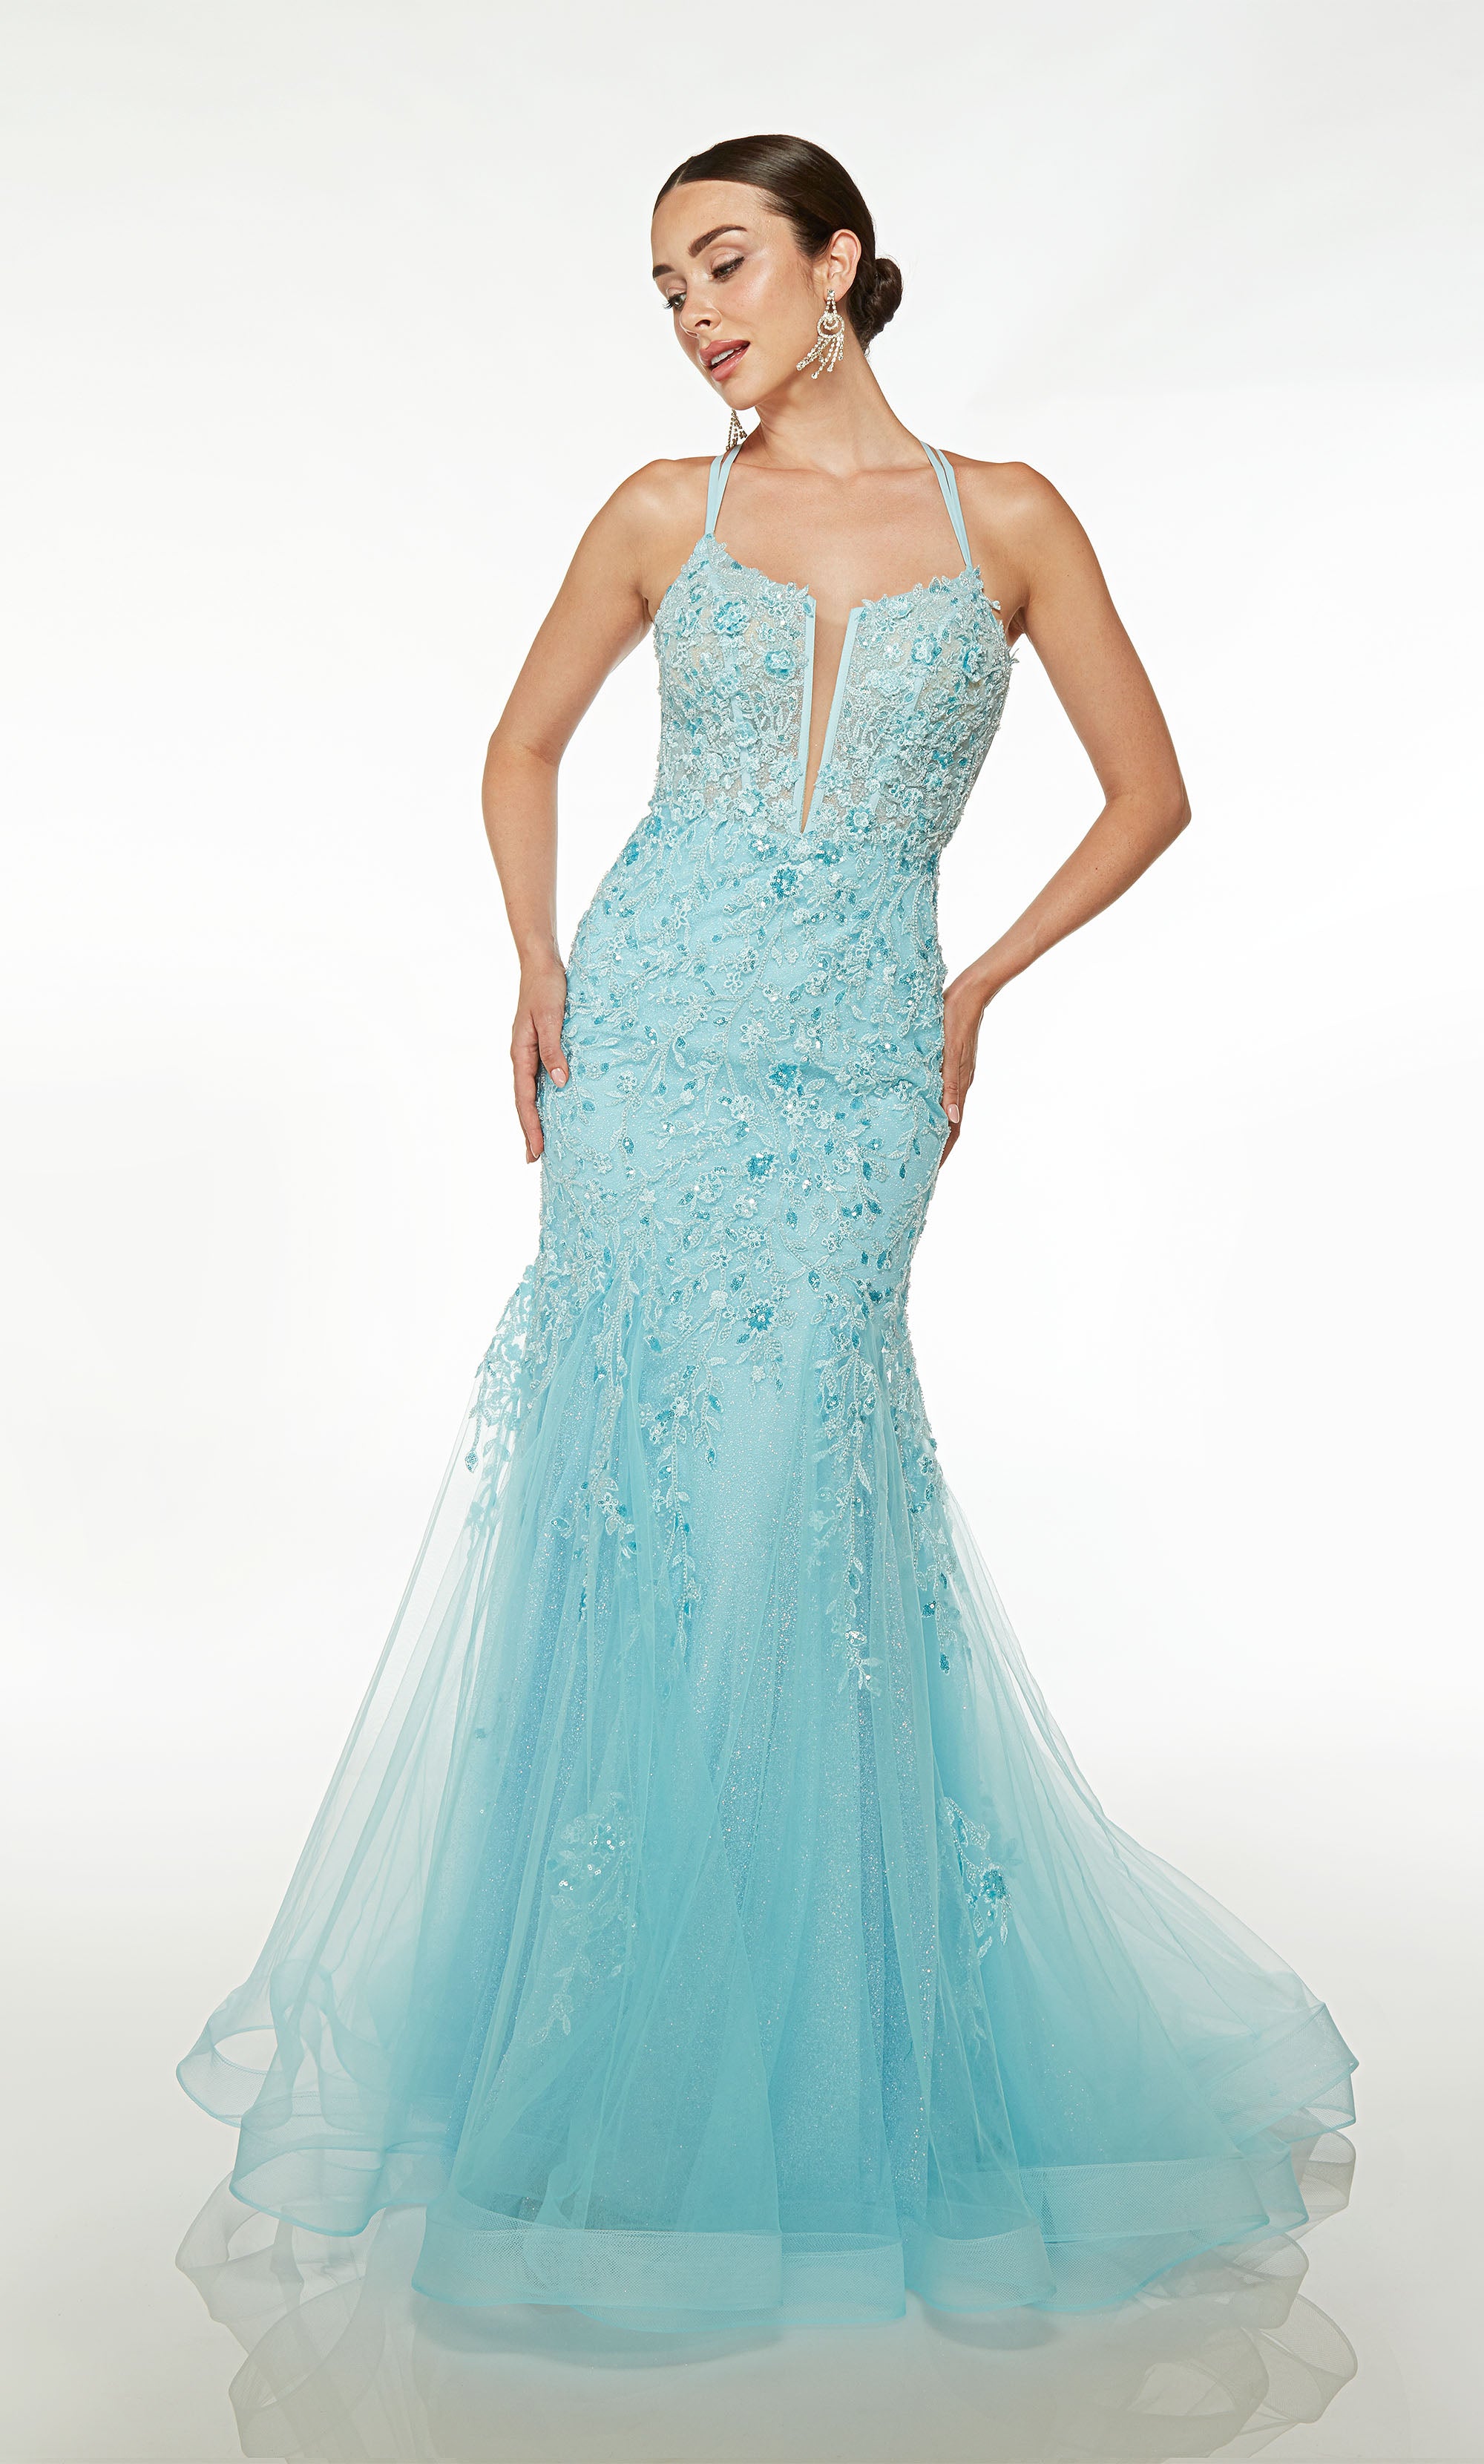 Charming baby blue mermaid gown: intricate beaded floral lace appliques, sheer corset bodice, dual straps, lace-up back, and layered train for an captivating look.